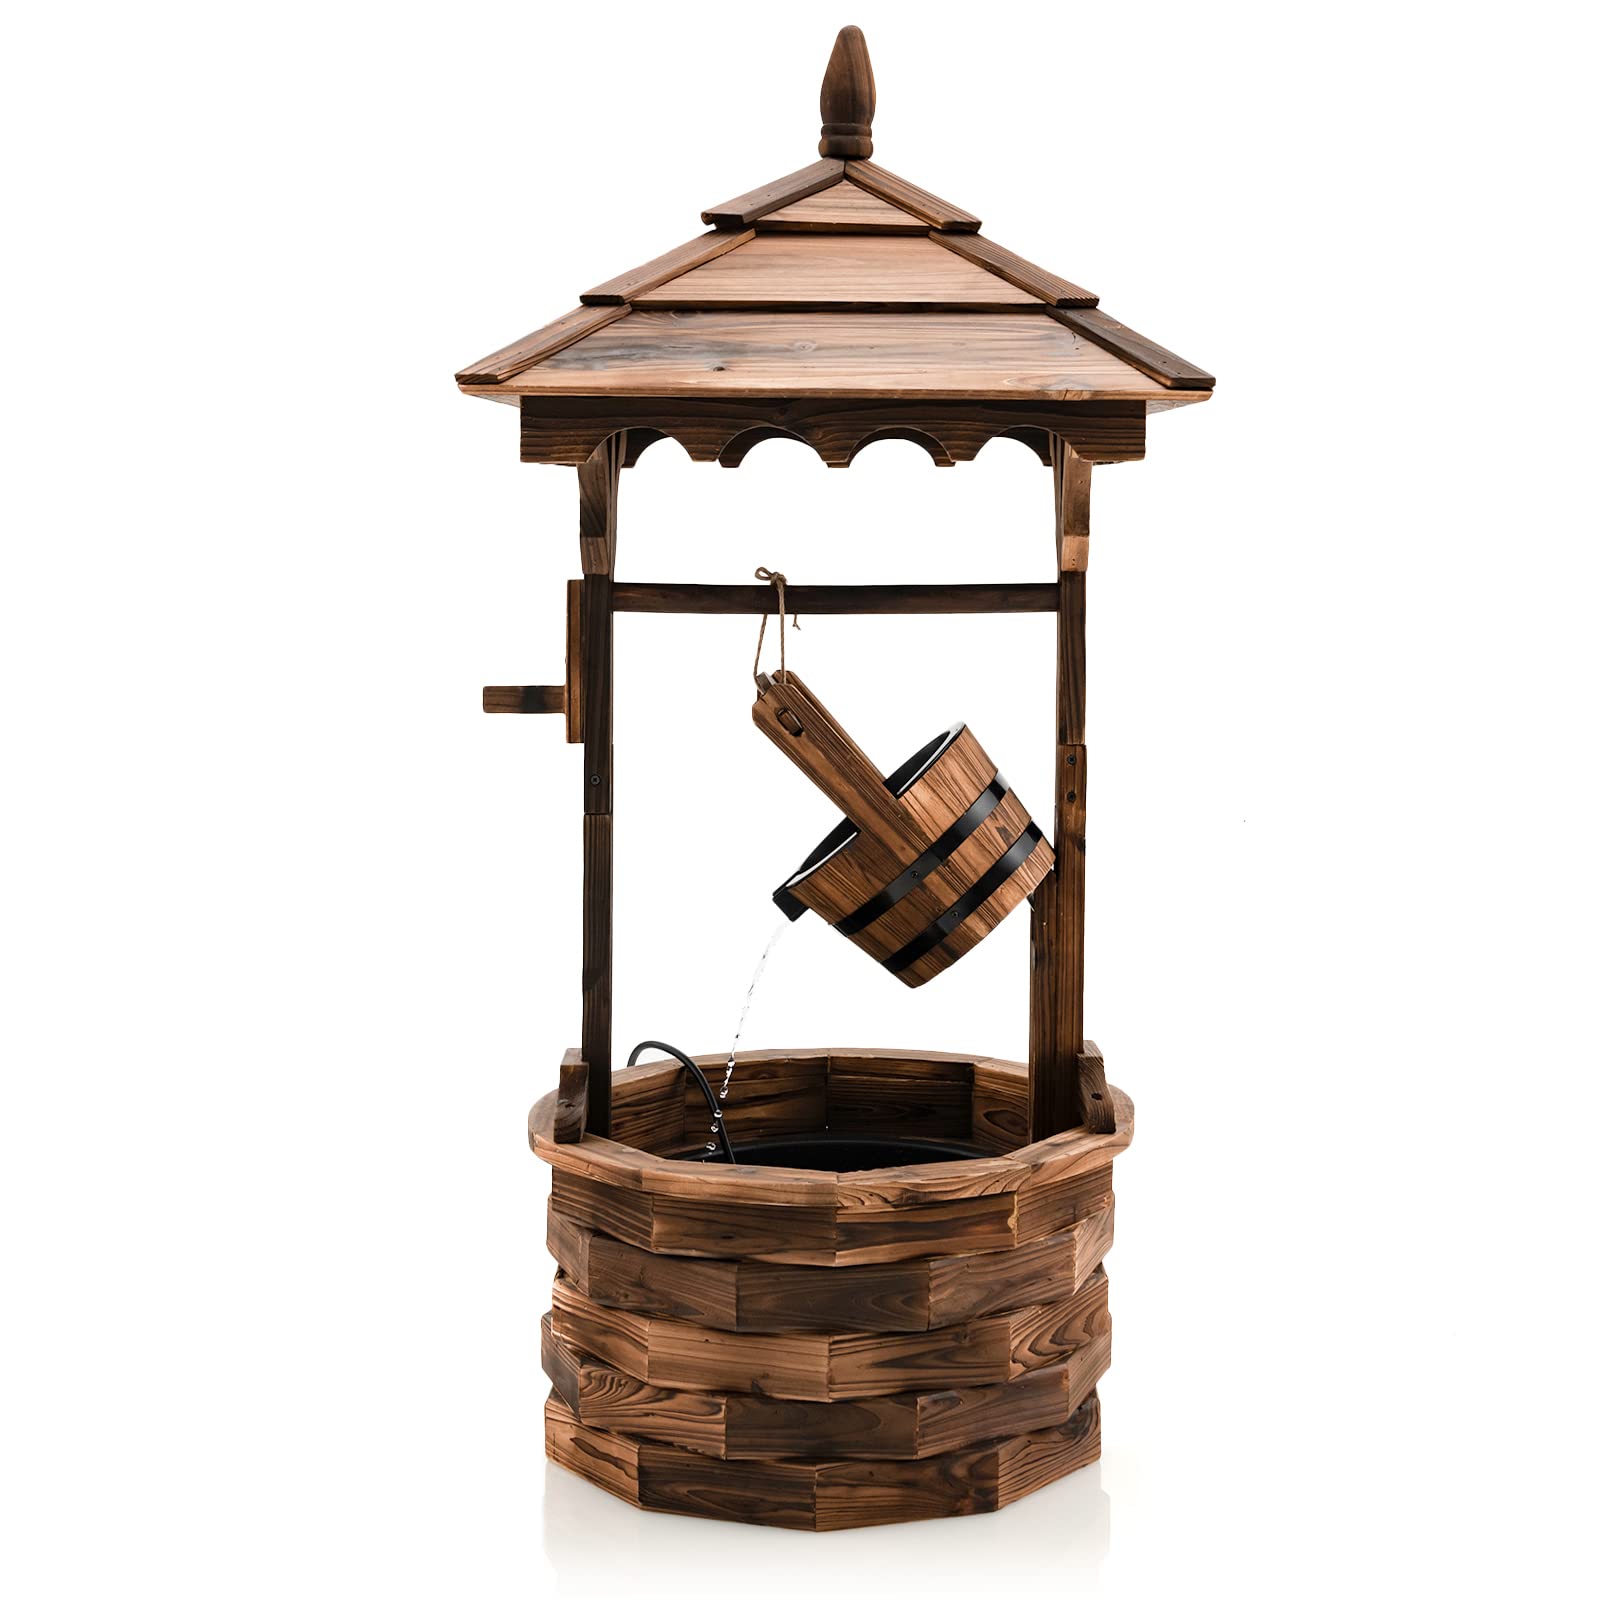 Giantex Rustic Wishing Well Fountain, Outdoor Wooden Water Fountain with Electric Pump